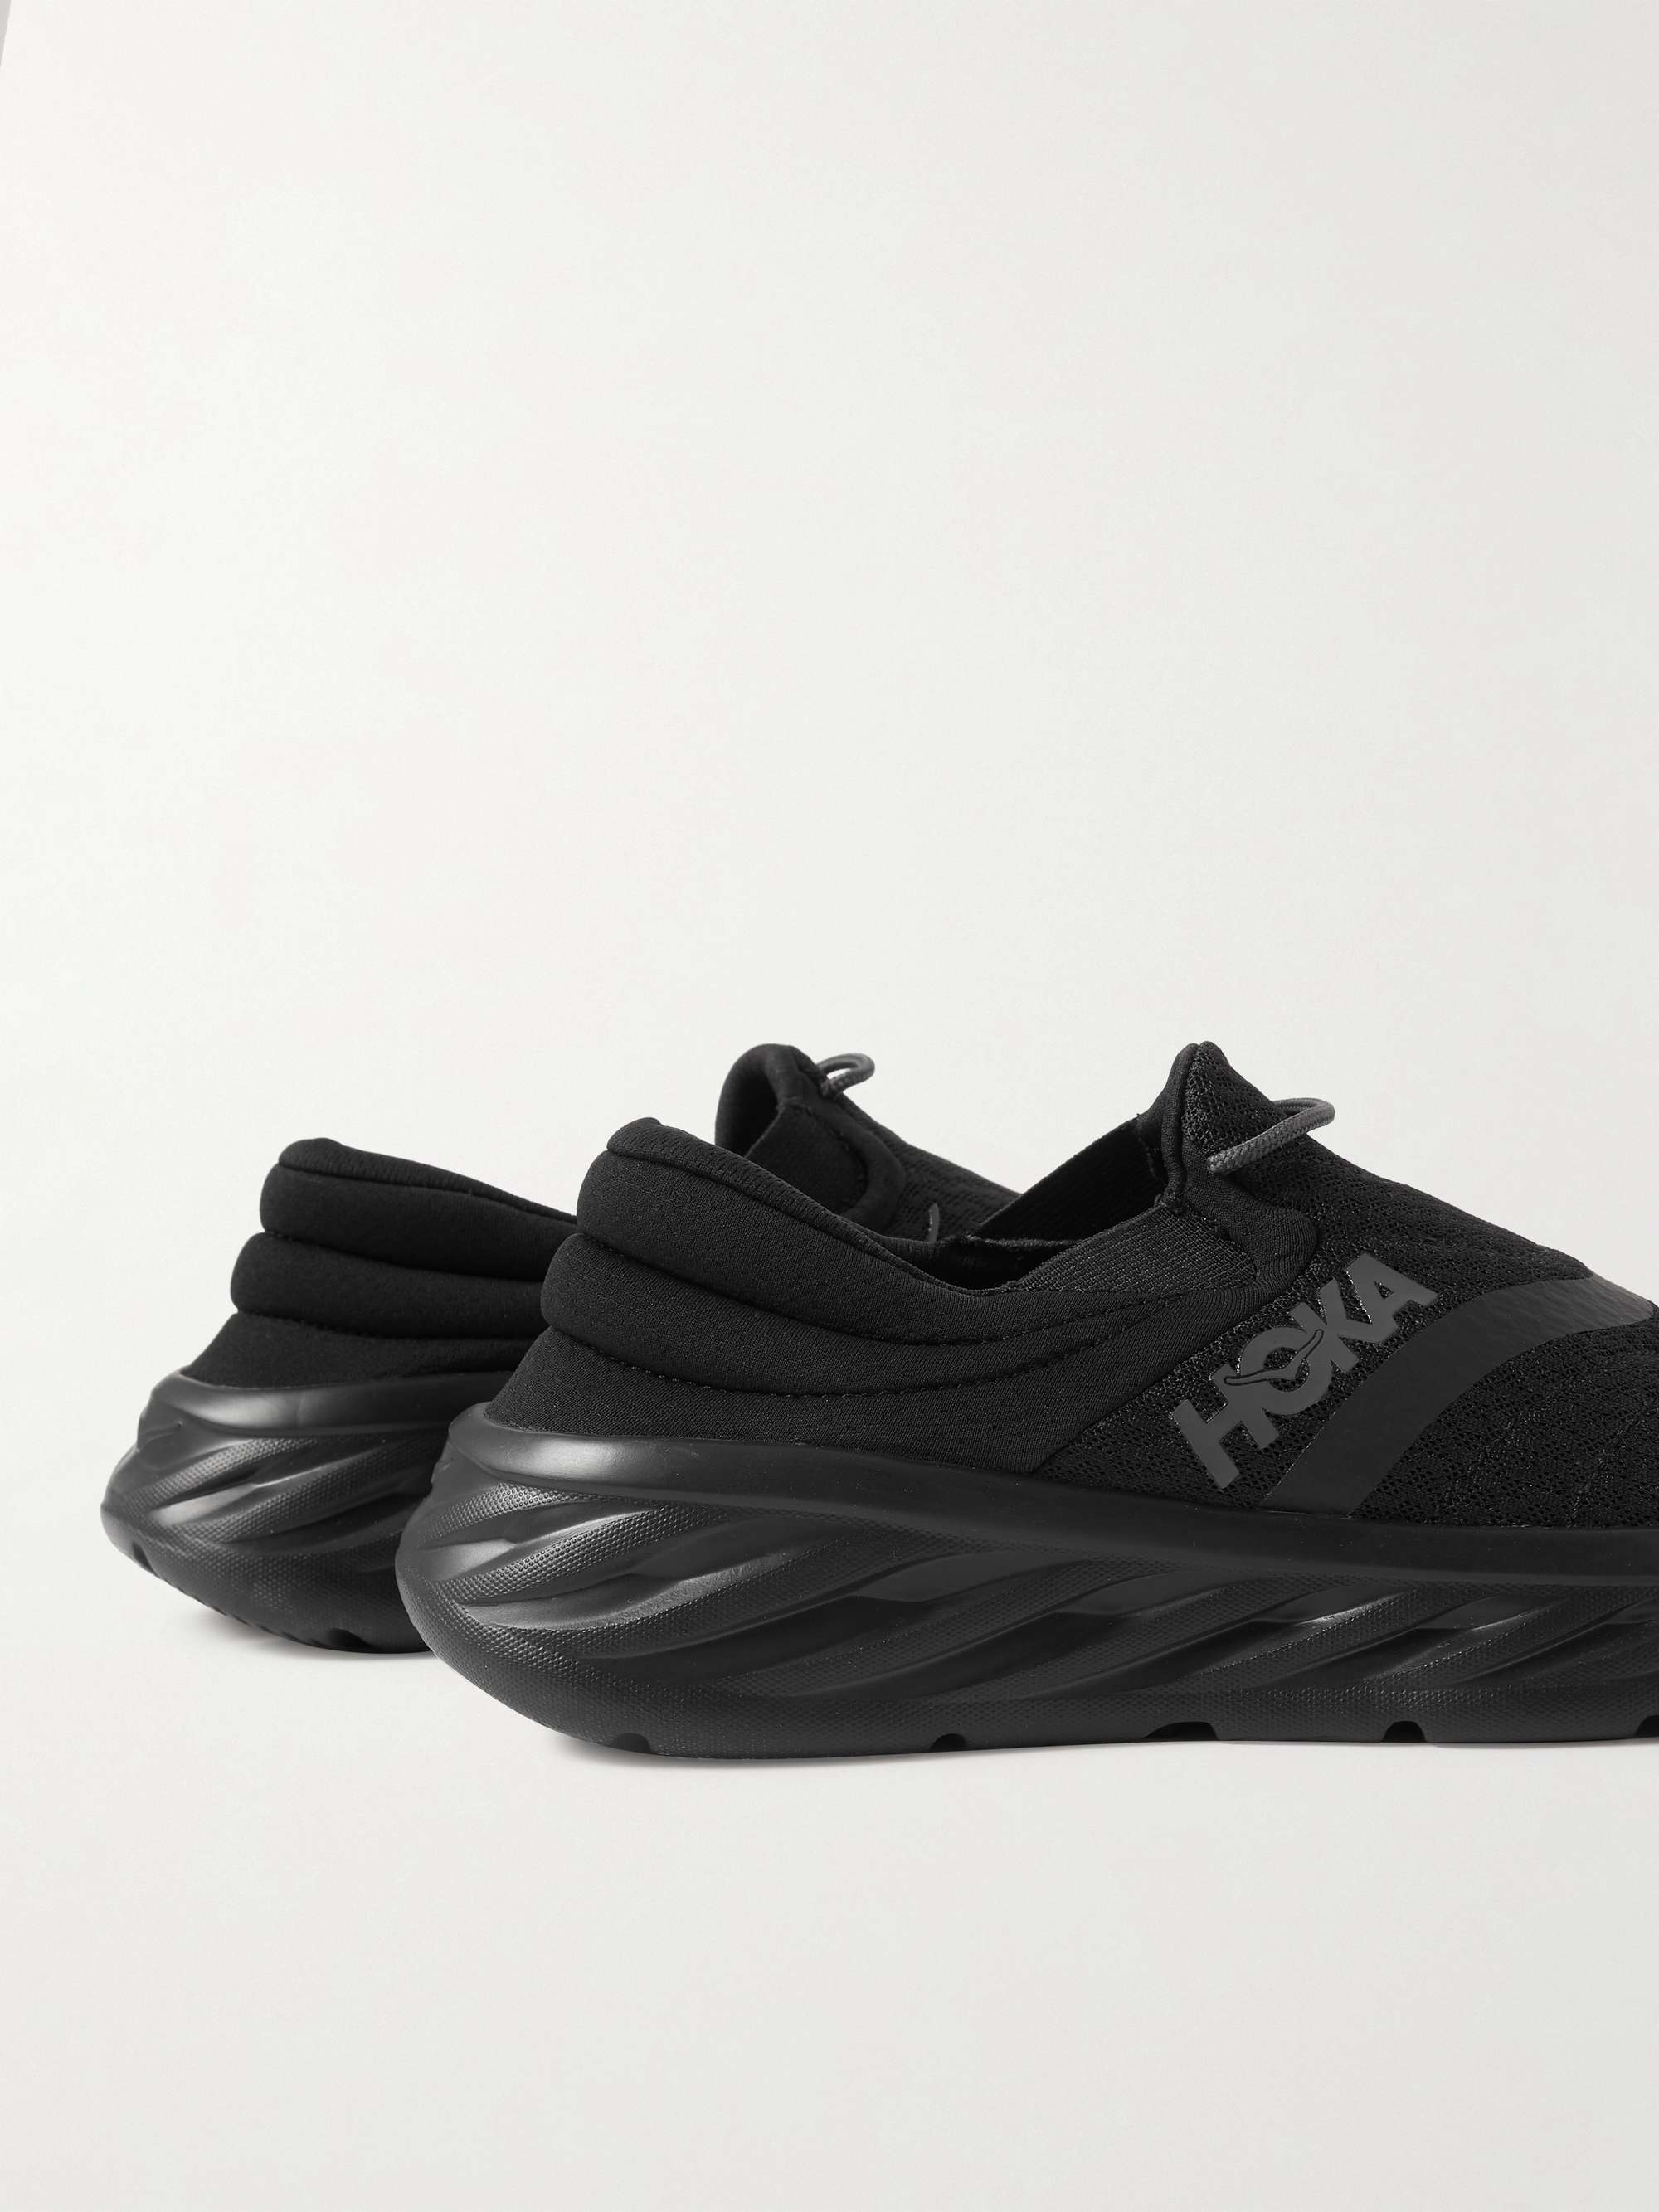 HOKA ONE ONE Ora Recovery Quilted Padded  Mesh and Rubber Slippers